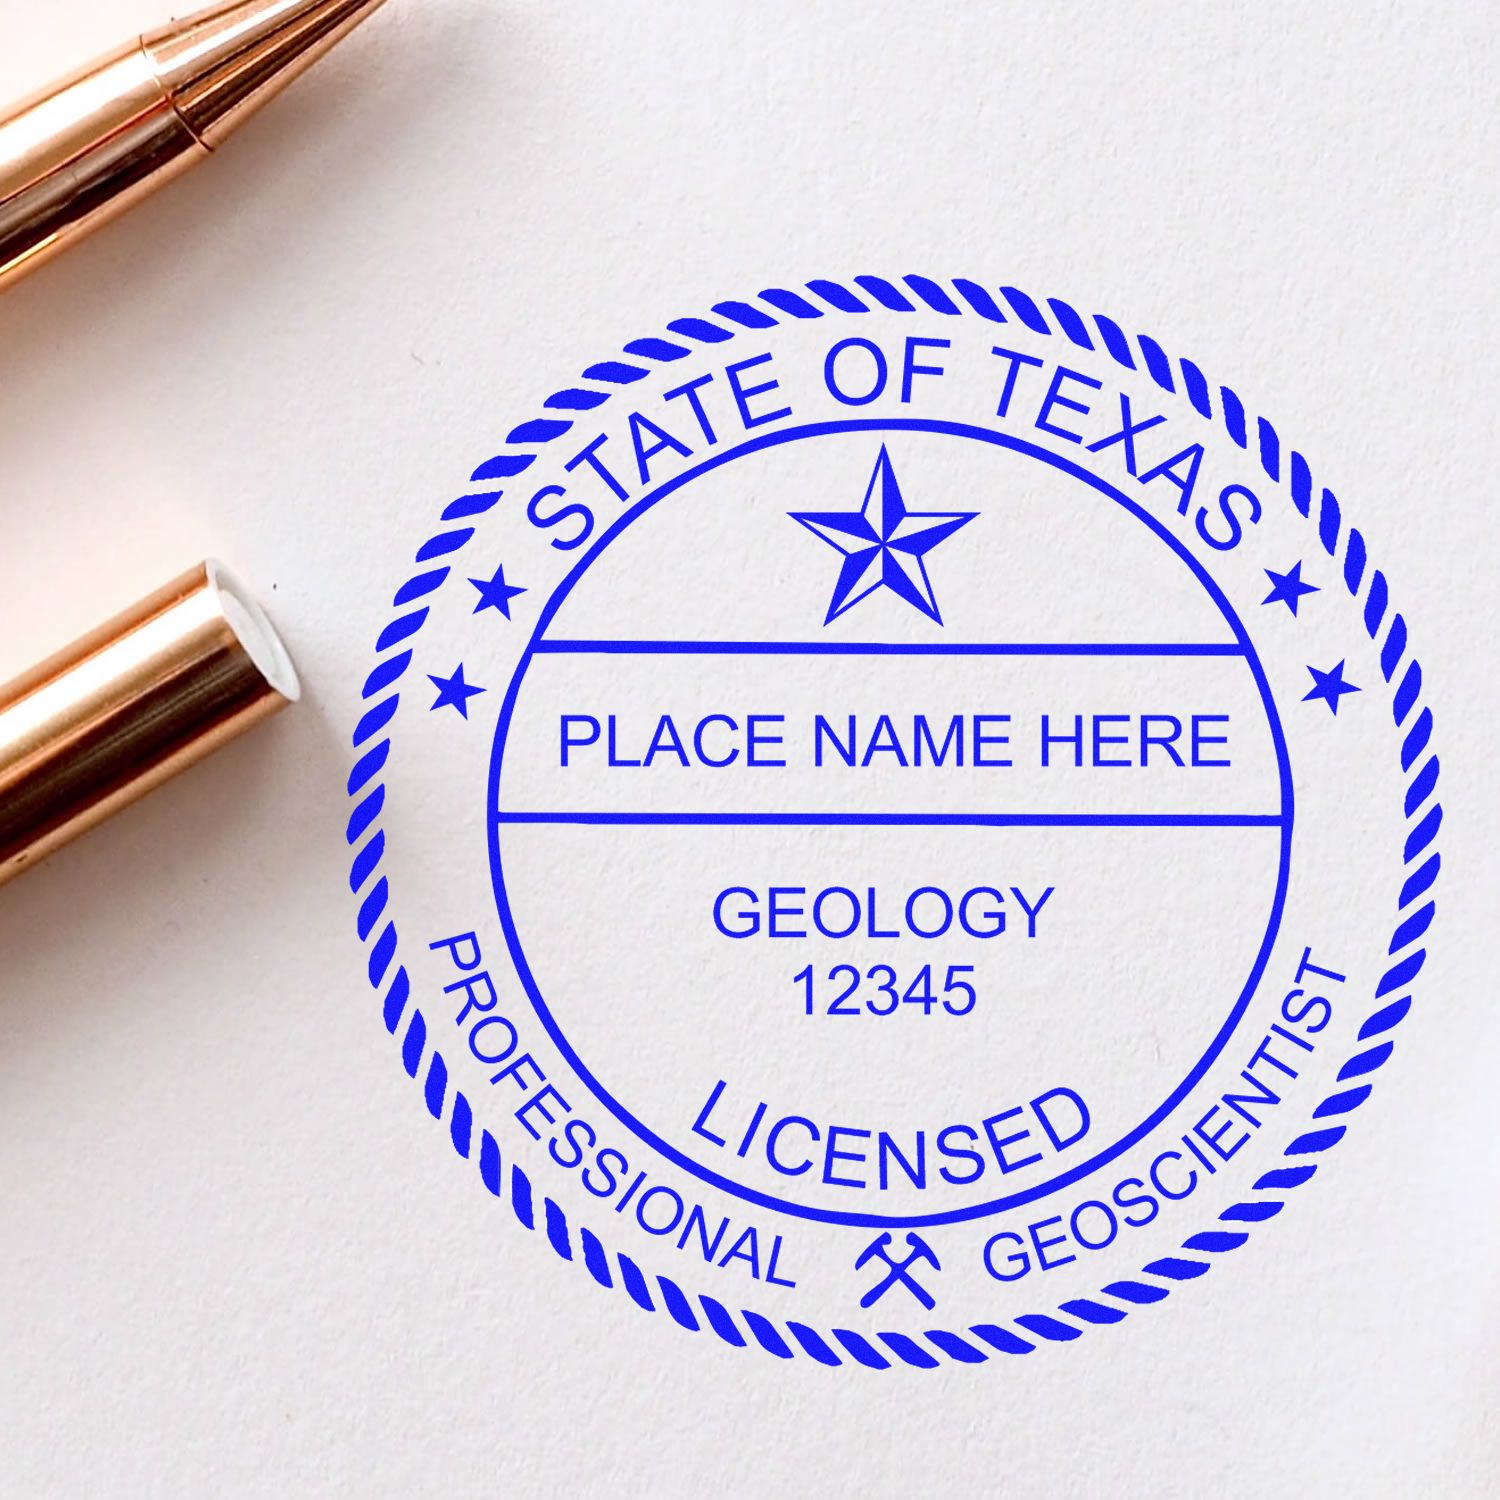 An alternative view of the Digital Texas Geologist Stamp, Electronic Seal for Texas Geologist stamped on a sheet of paper showing the image in use